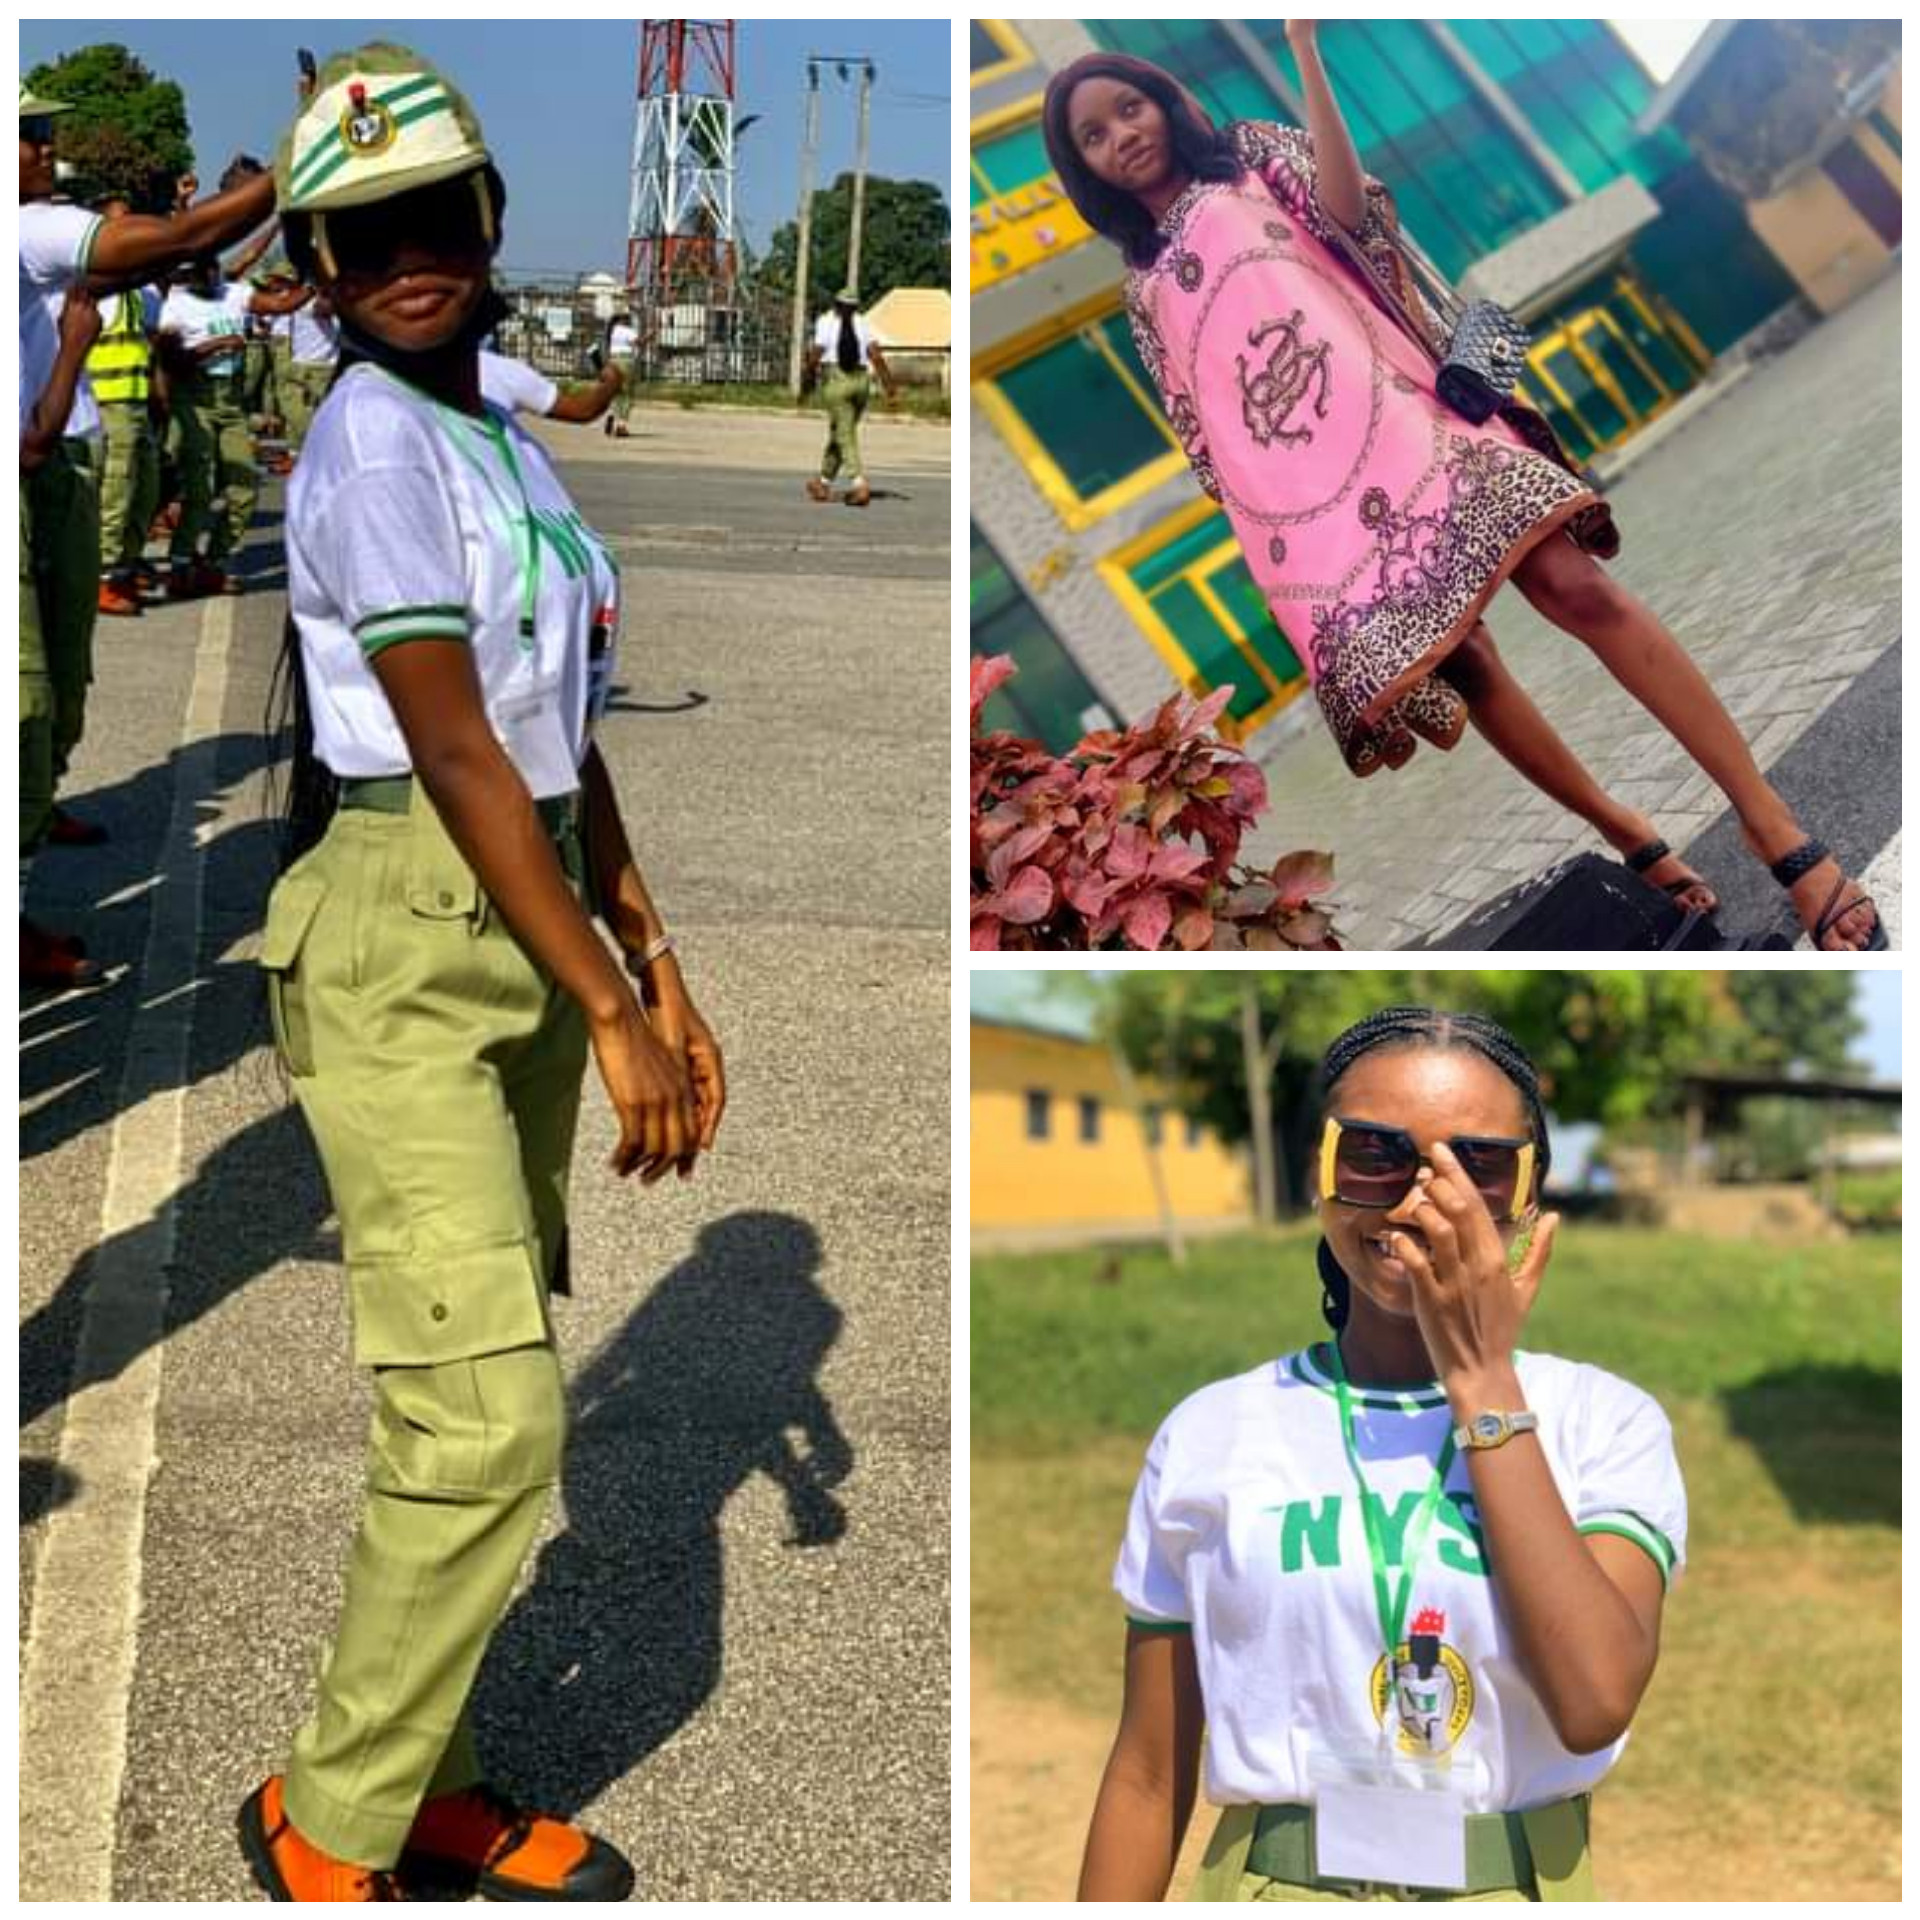 ‘Virgin corper’ brags about purity, declares chastity against nudity